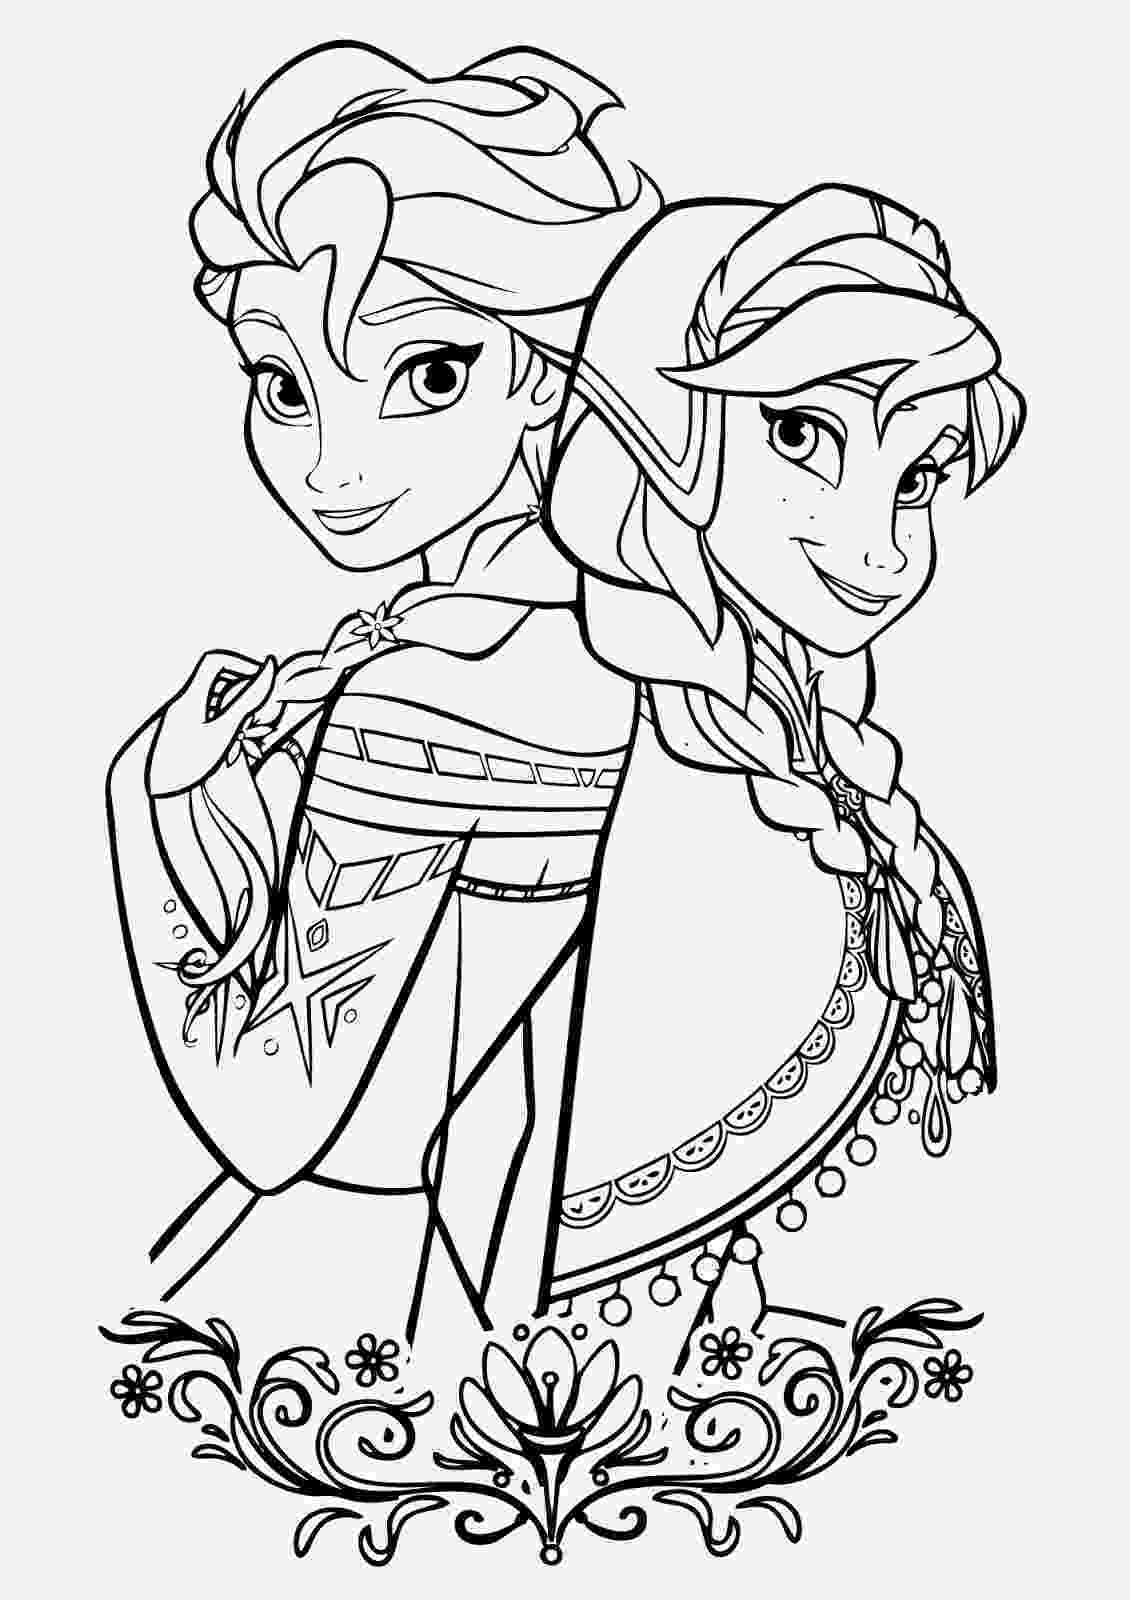 free printable colouring pages frozen 15 beautiful disney frozen coloring pages free instant free pages frozen printable colouring 